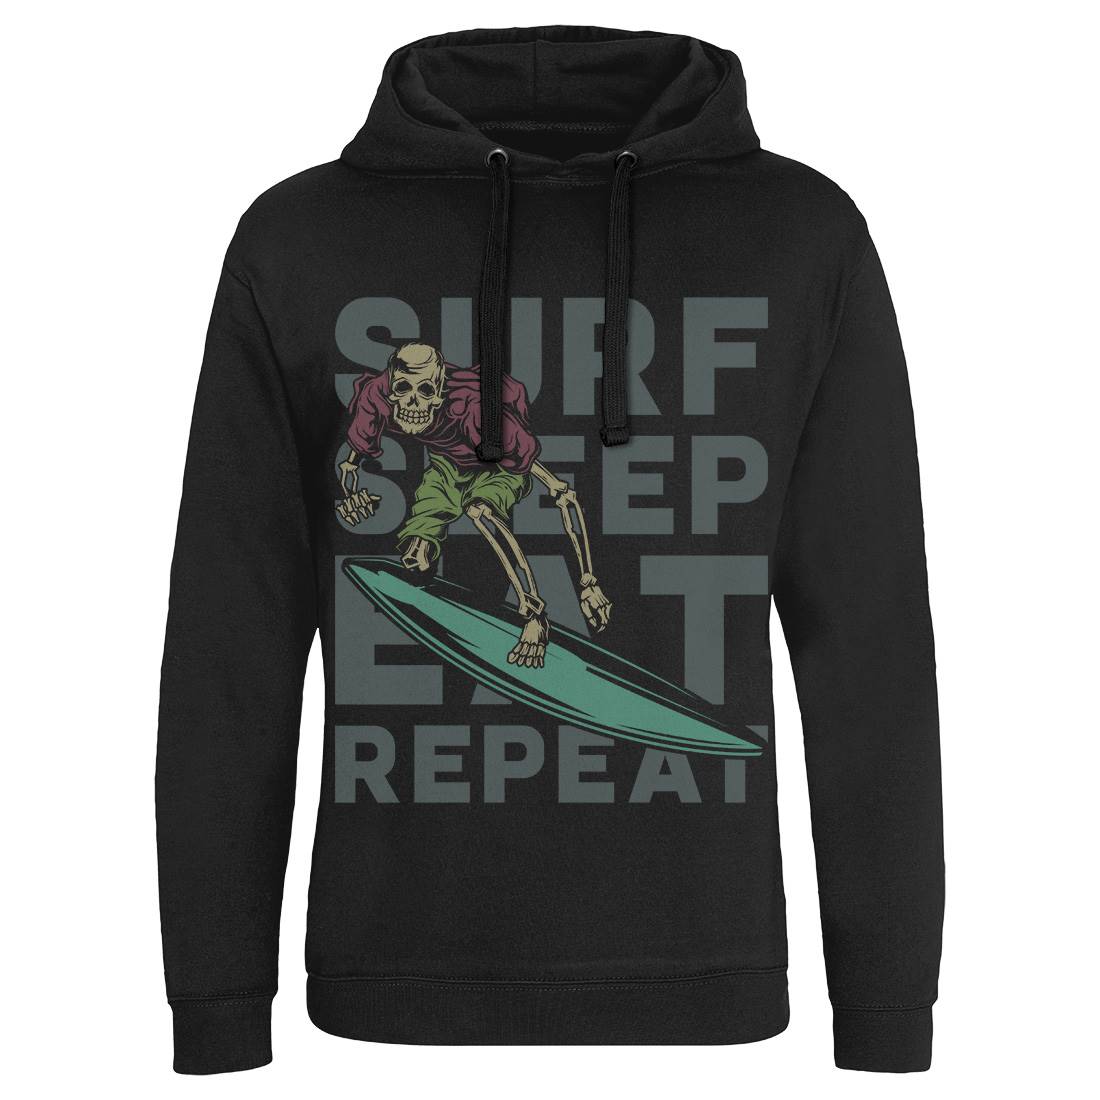 Eat Sleep Surfing Mens Hoodie Without Pocket Surf B867